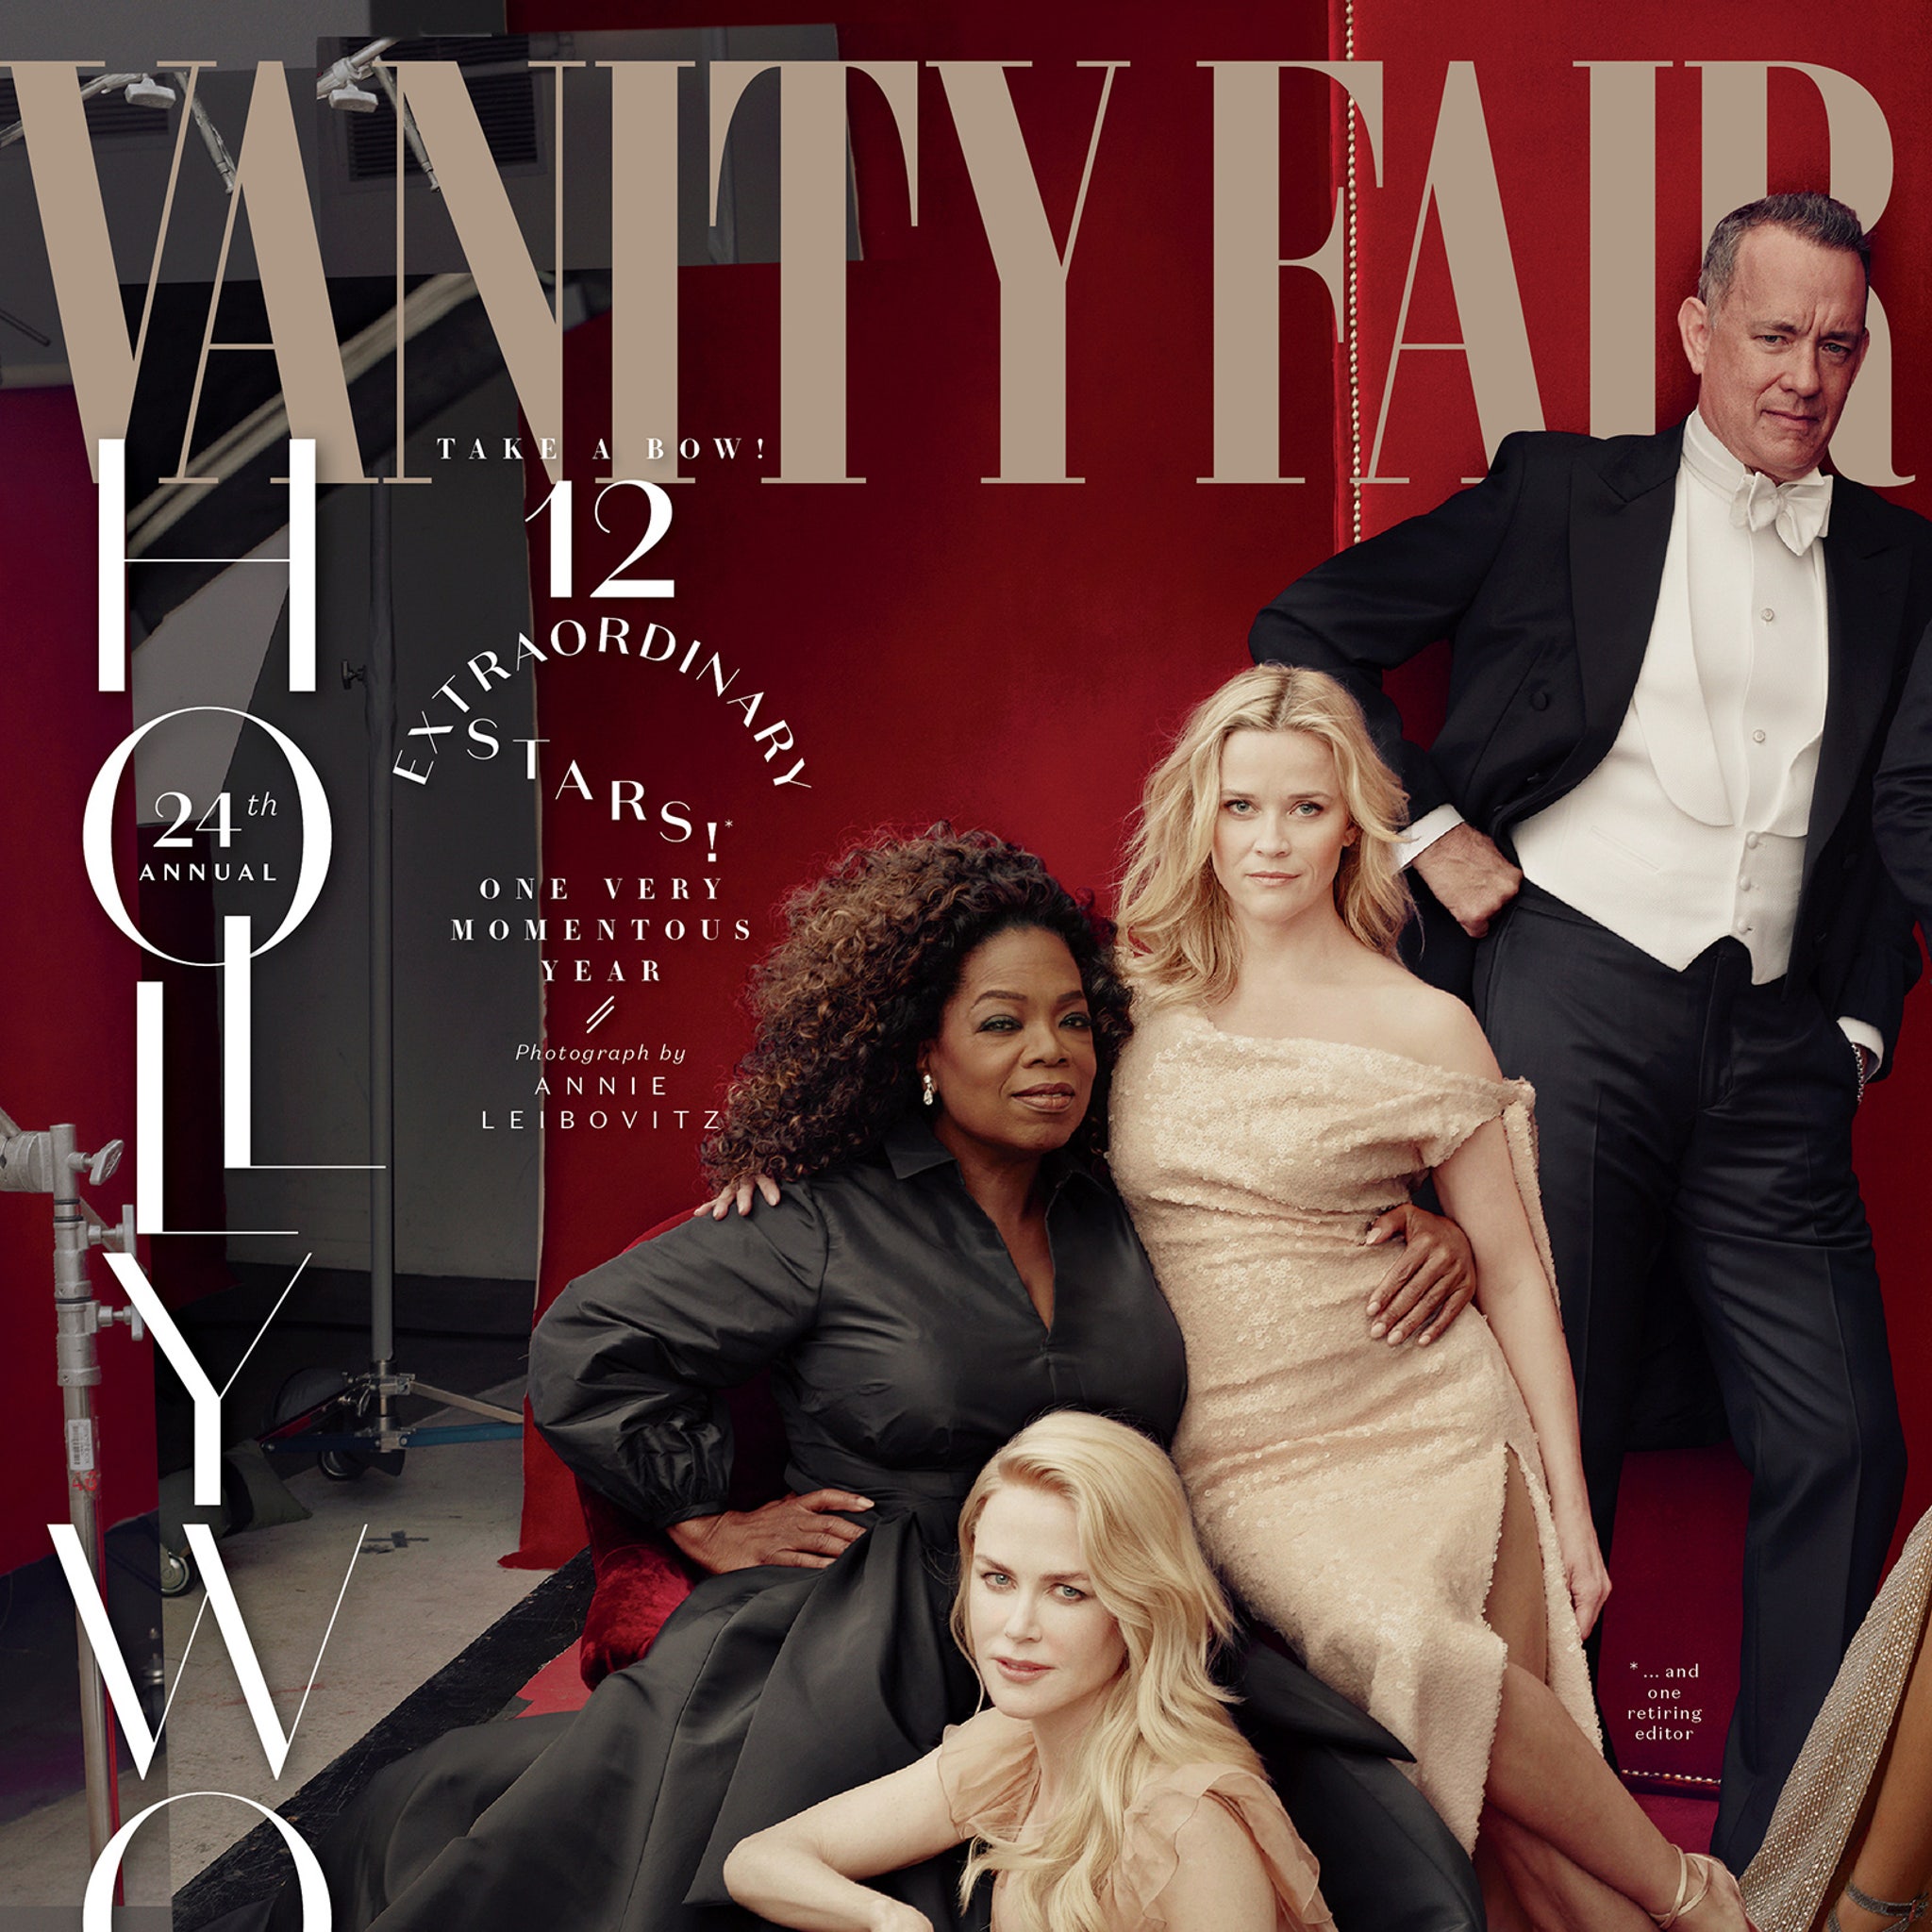 Photos: Vanity Fair at 25: The Covers